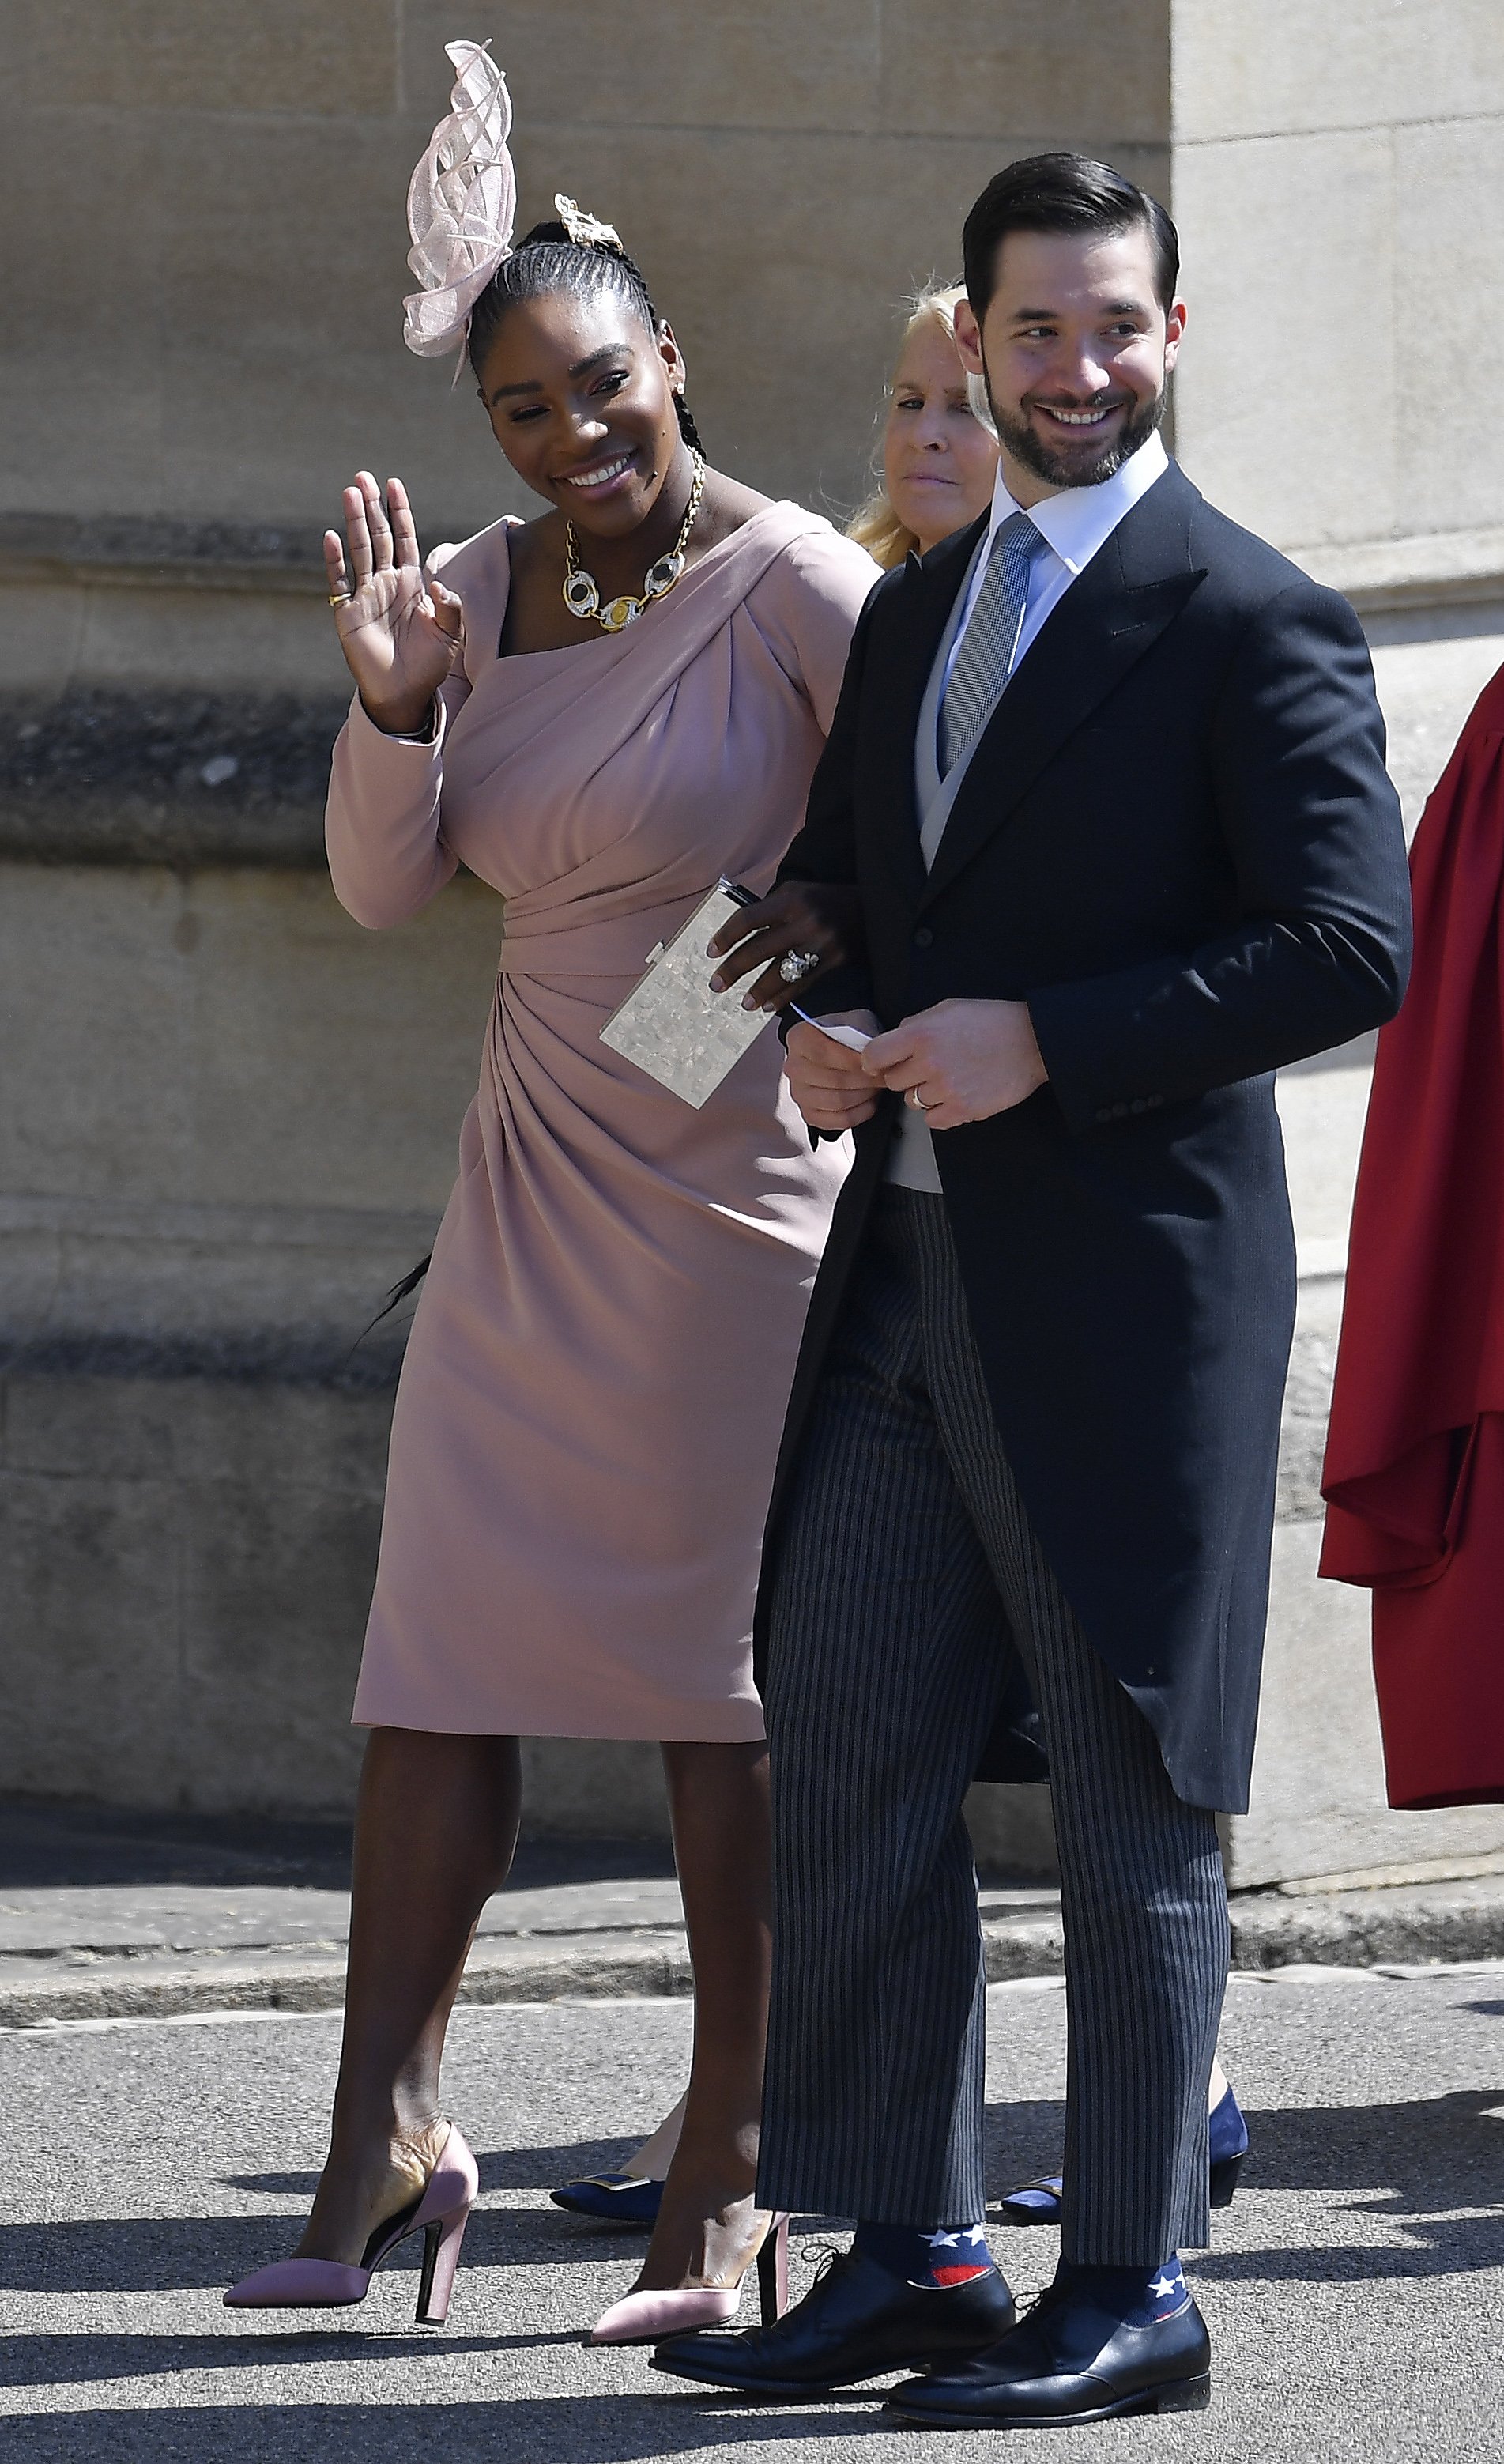 Serena Williams and Alexis Ohanian arrive at St George's Chapel at Windsor Castle before the wedding of Prince Harry to Meghan Markle on May 19, 2018. | Photo: GettyImages